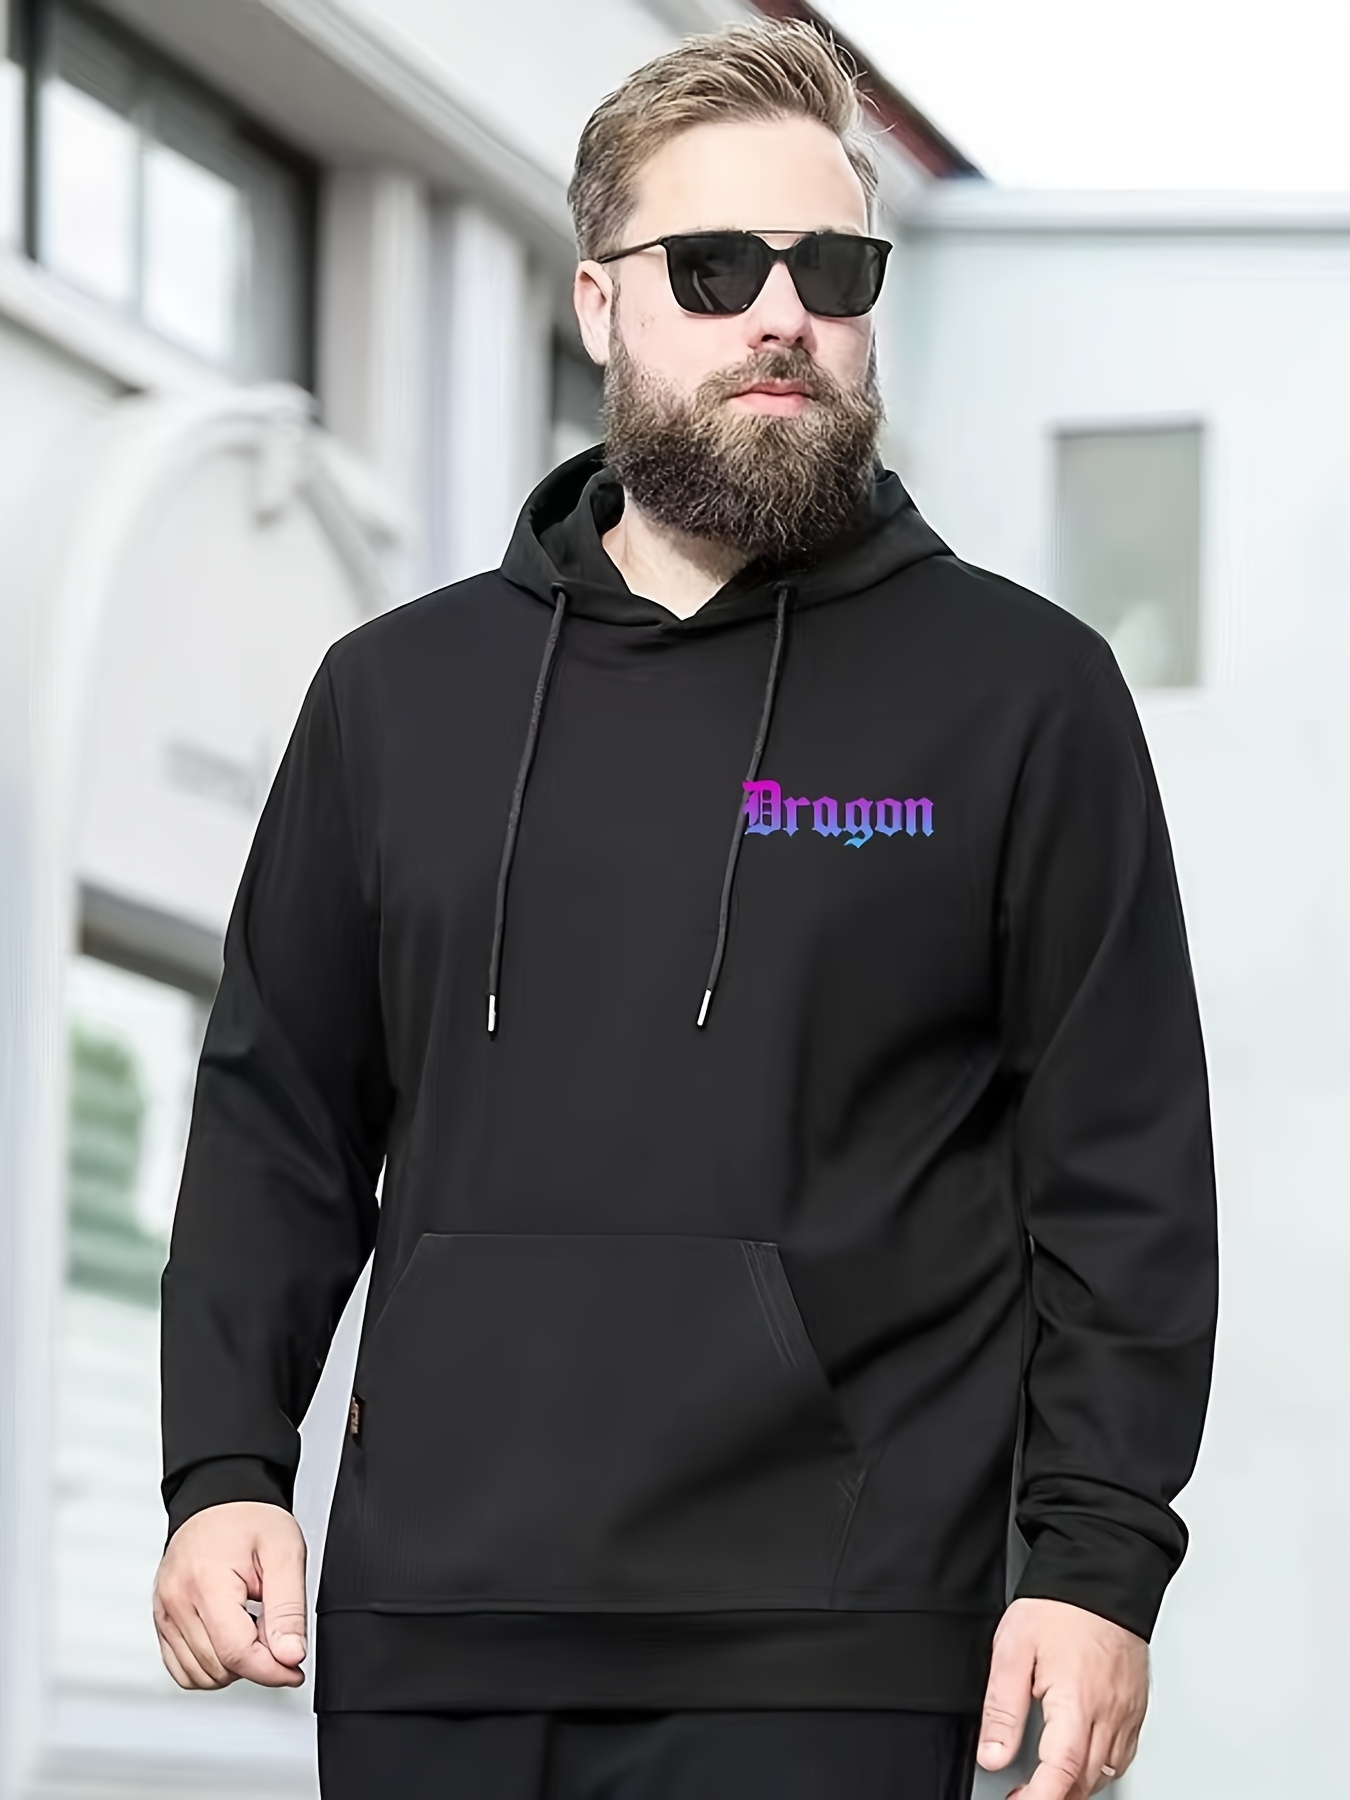 Taiaojing Men's Hooded Sweatshirt Los Angeles Letter Print Fashion Loose Plus Size Autumn and Winter Hooded Pullover Sweatshirts with Big Pocket, Size